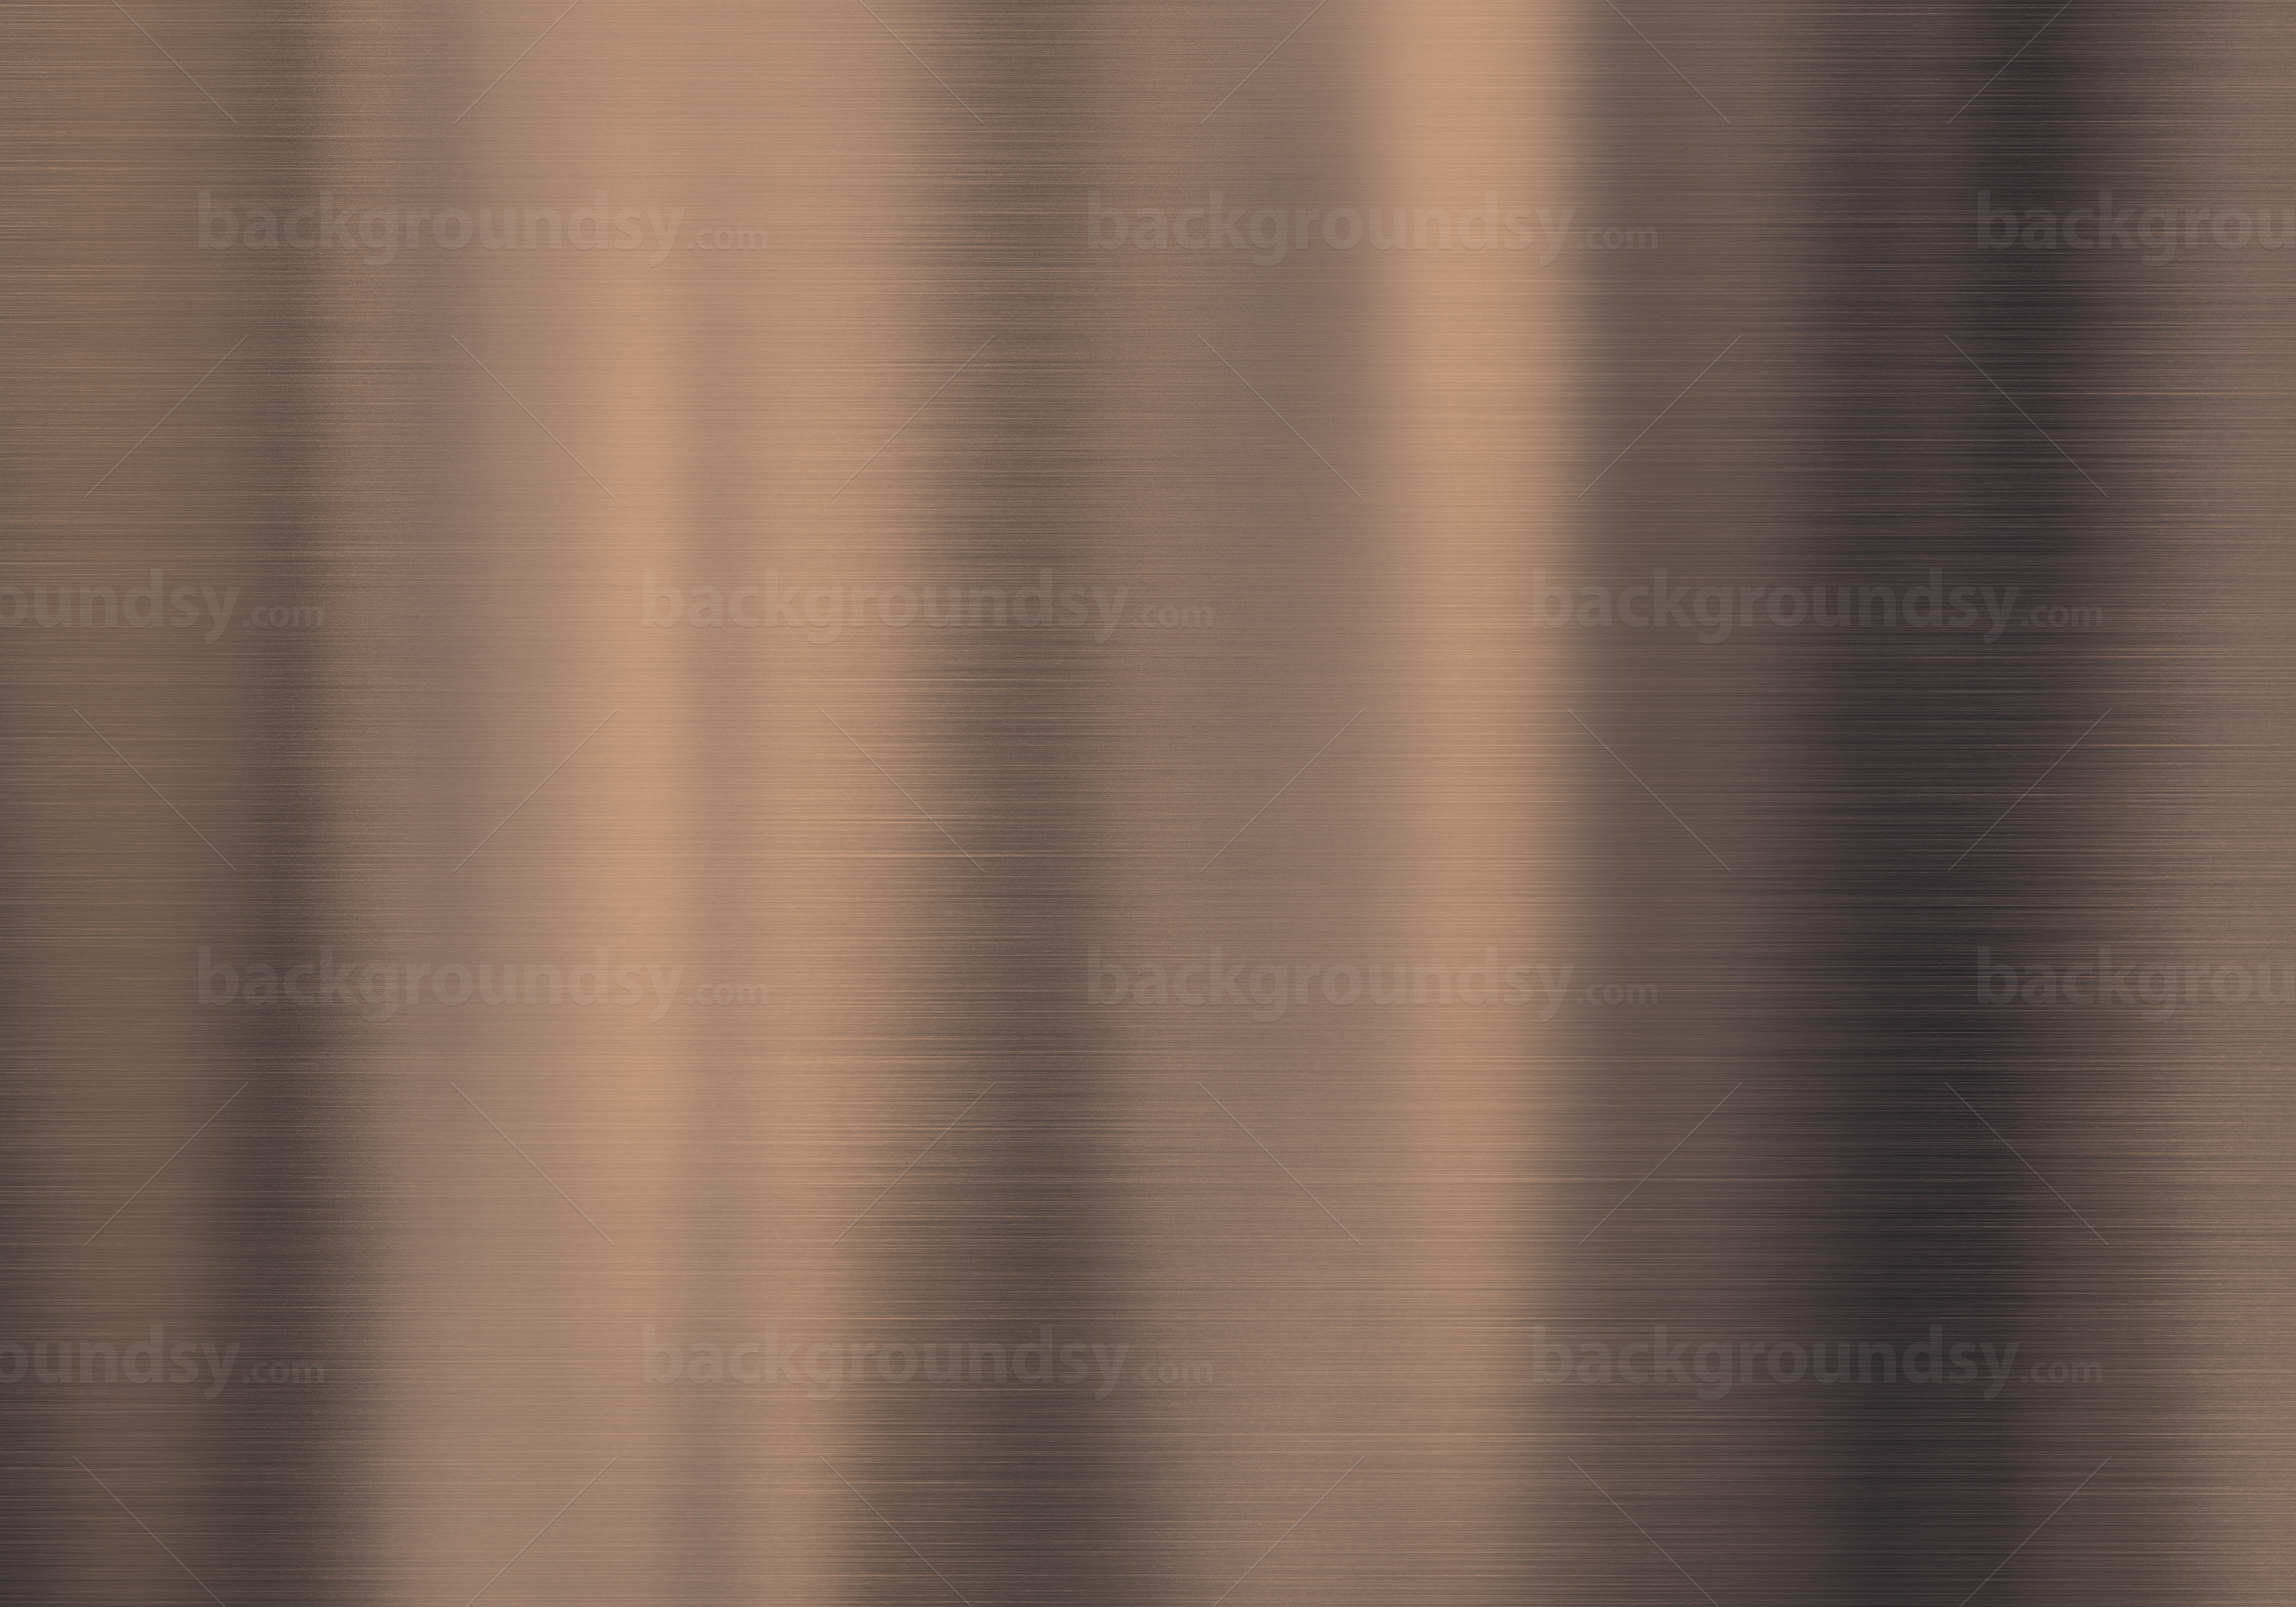 Army metal texture | Backgroundsy.com